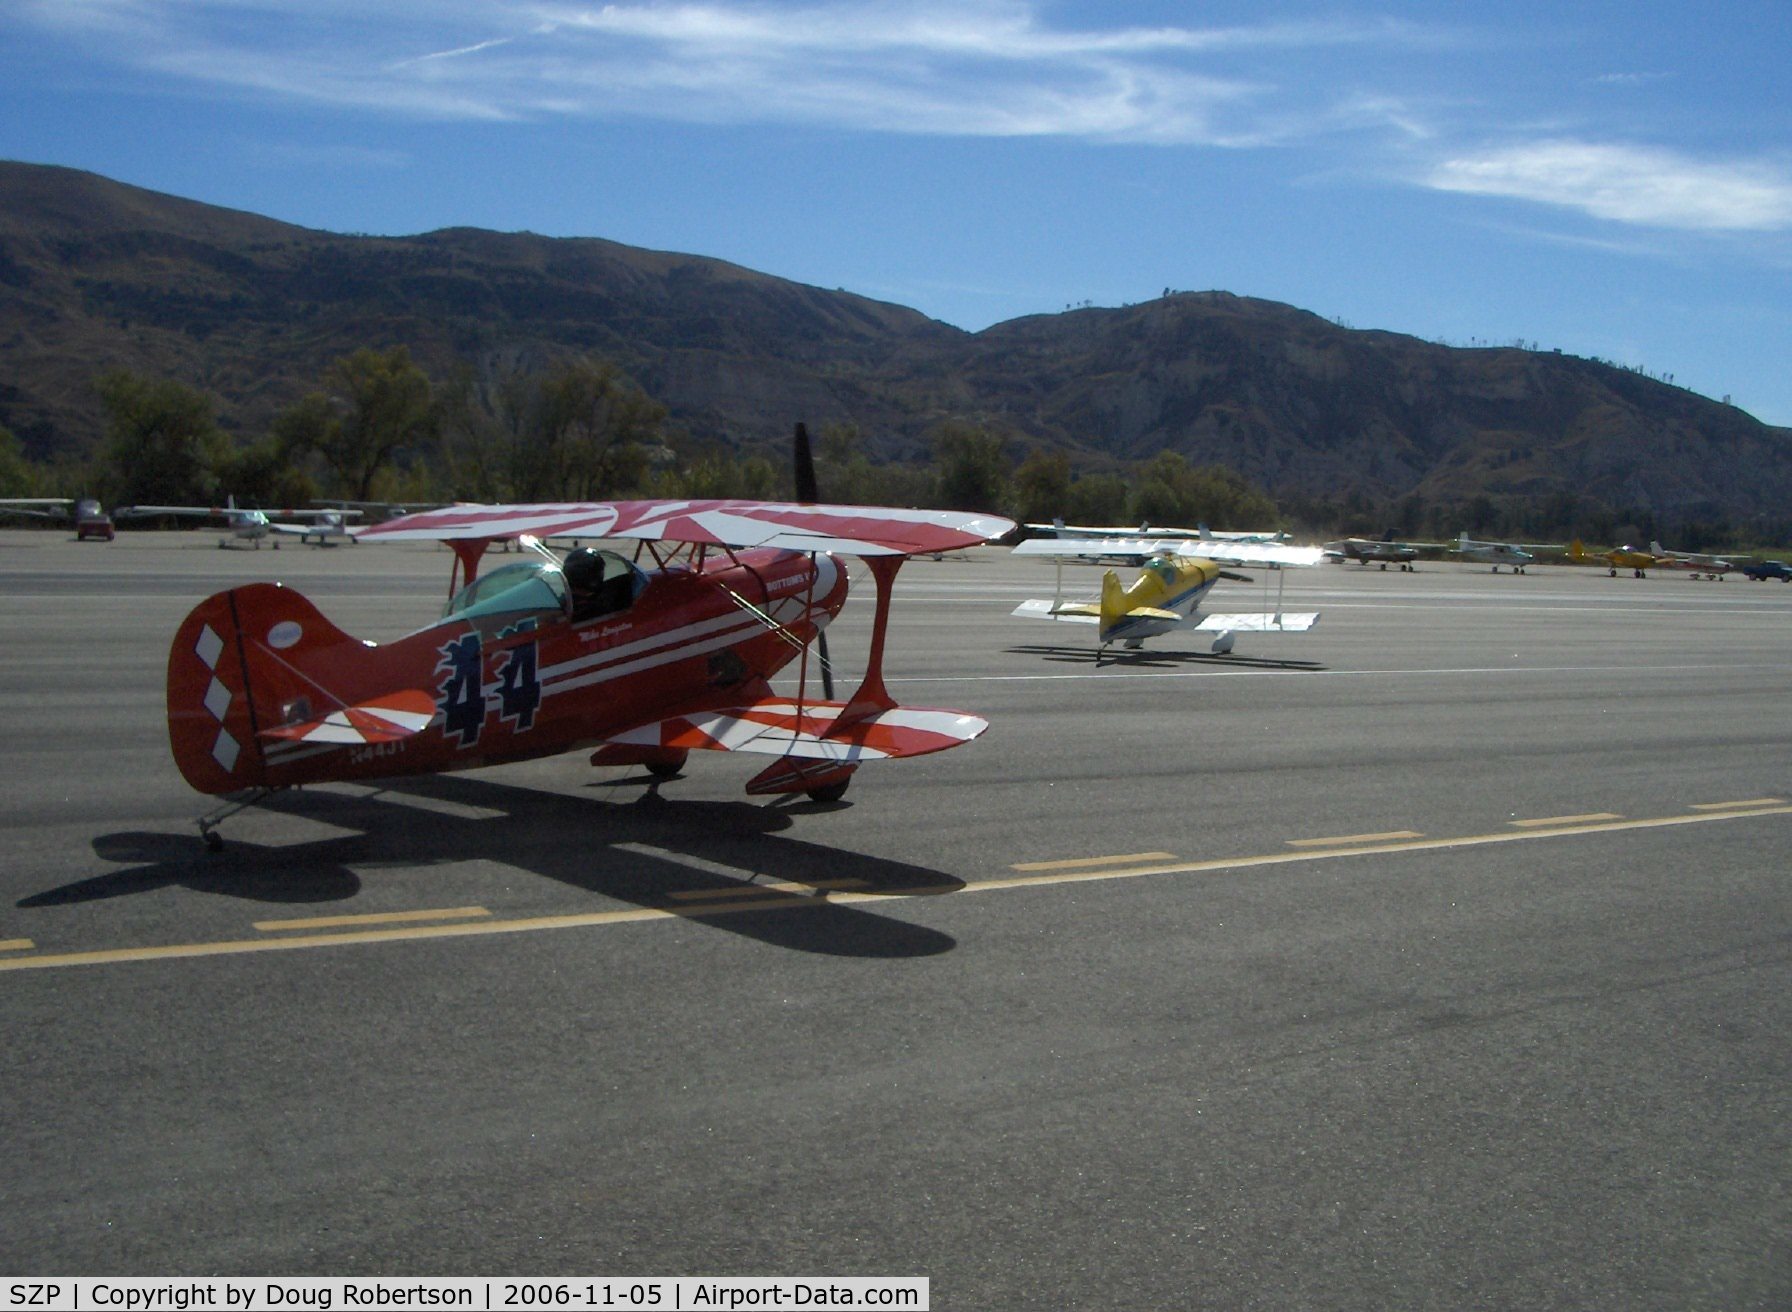 Santa Paula Airport (SZP) - A pair of PITTS S-1S SPECIALS-N44JT and N431ED taxying to Runway 04 for takeoff